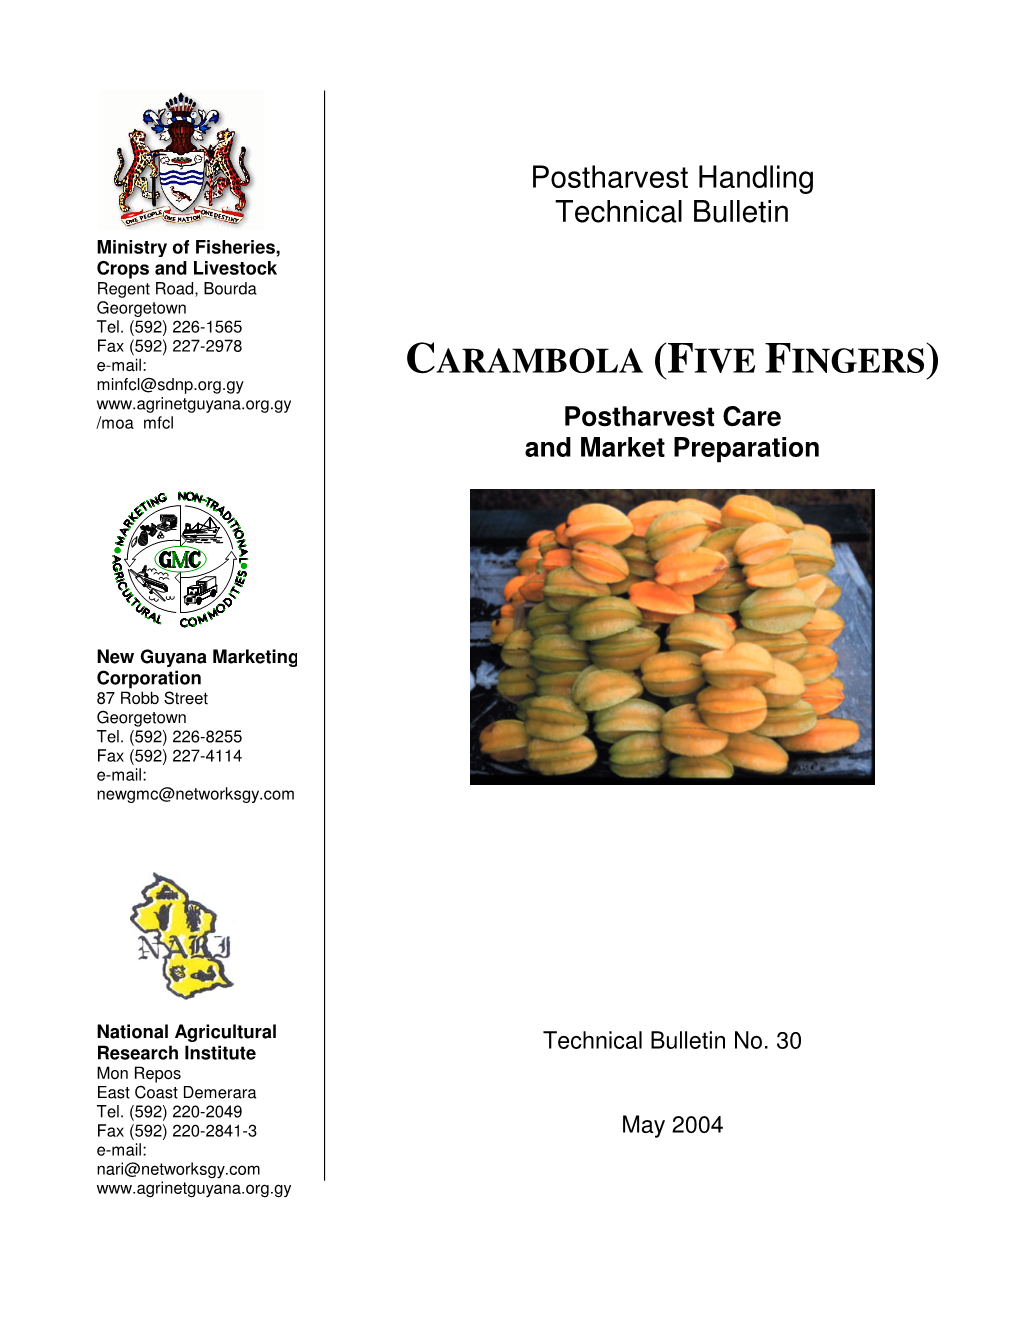 CARAMBOLA (FIVE FINGERS) Minfcl@Sdnp.Org.Gy /Moa Mfcl Postharvest Care and Market Preparation